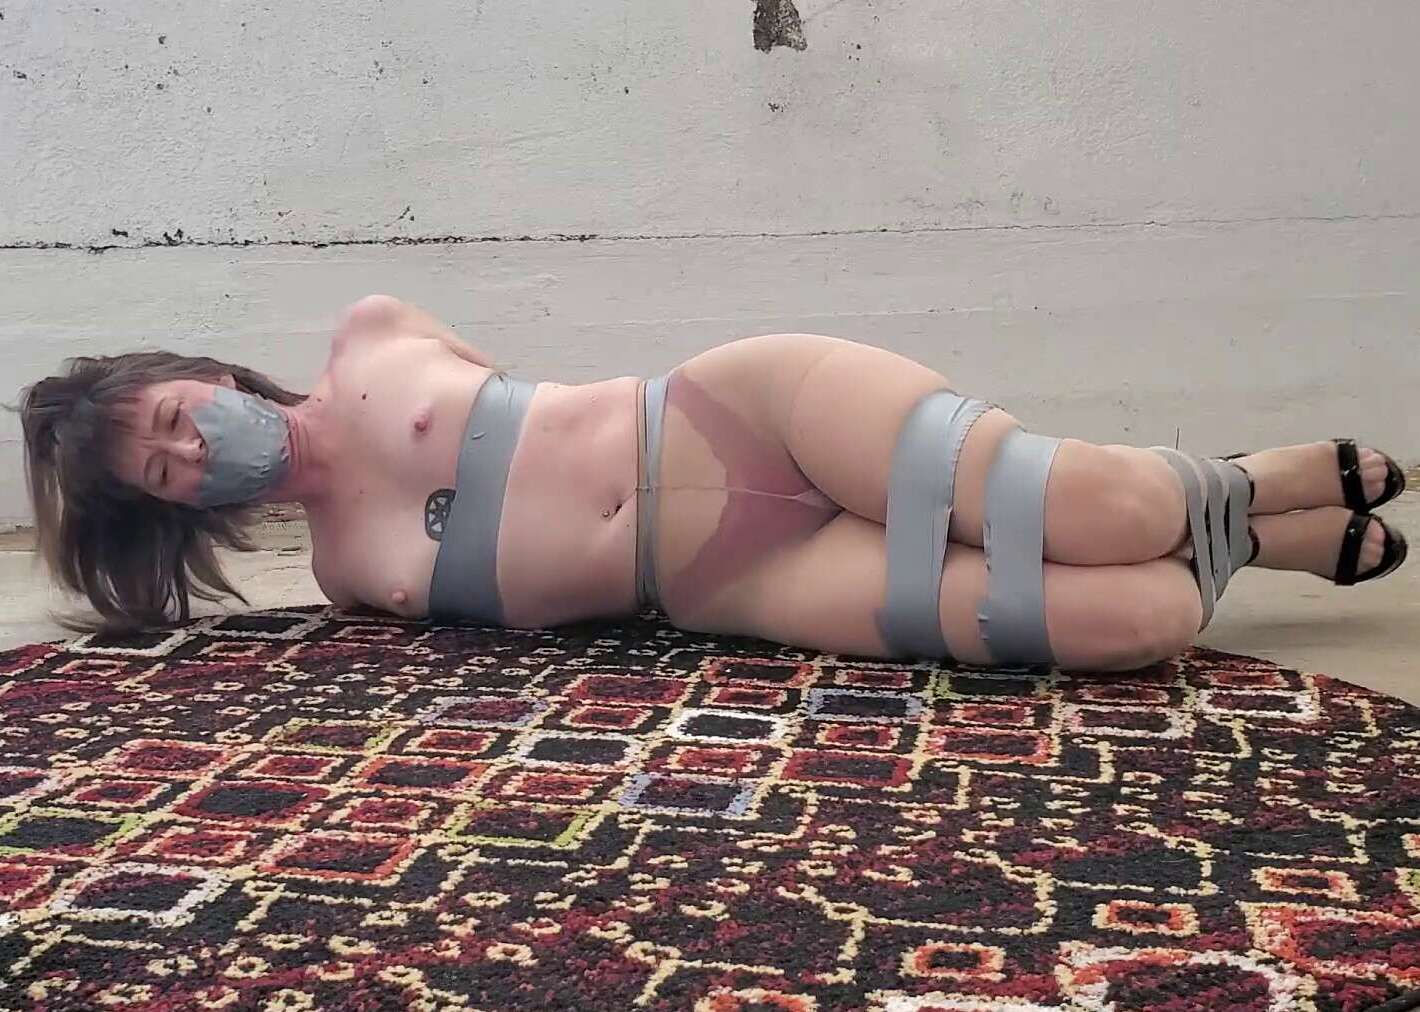 Tape Bondage - AJ Marion - Tape Tie Torment - Cinched and Secured